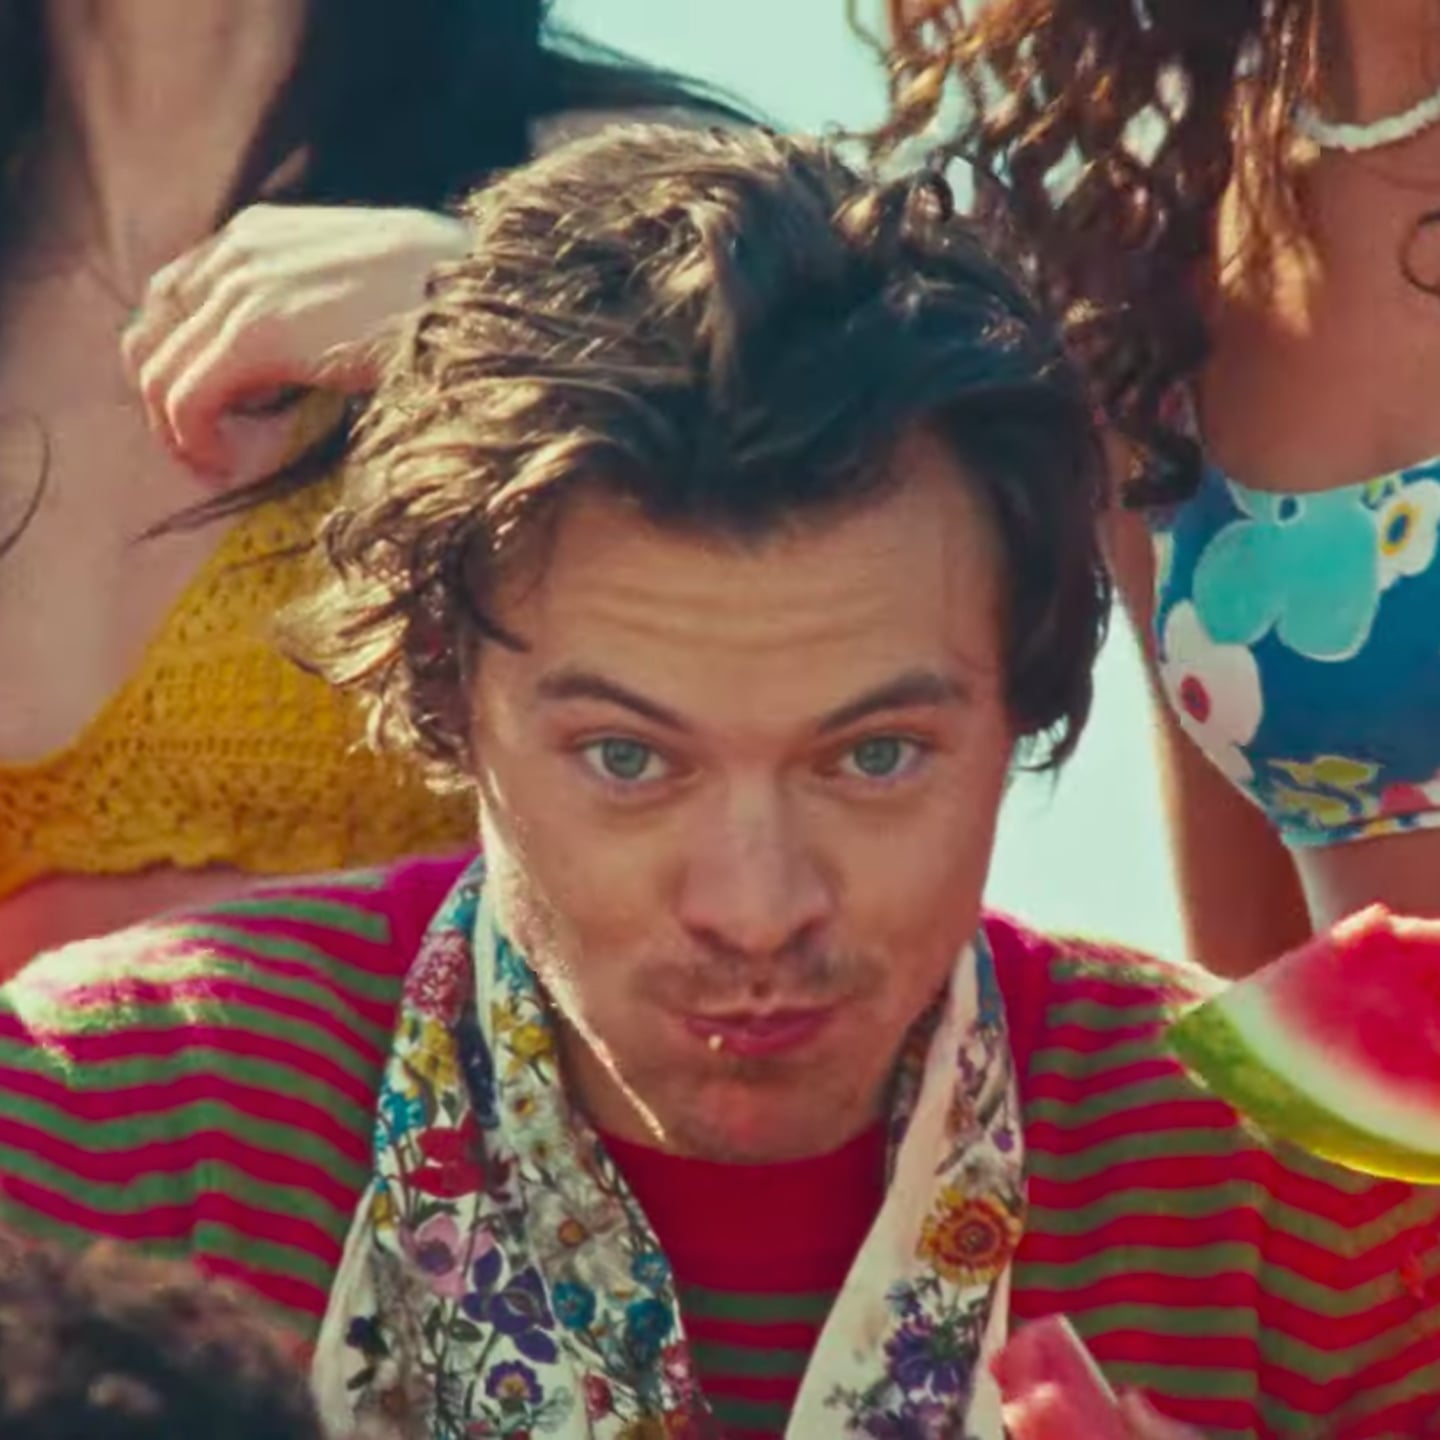 Read Reactions to Harry Styles's Watermelon Sugar Video